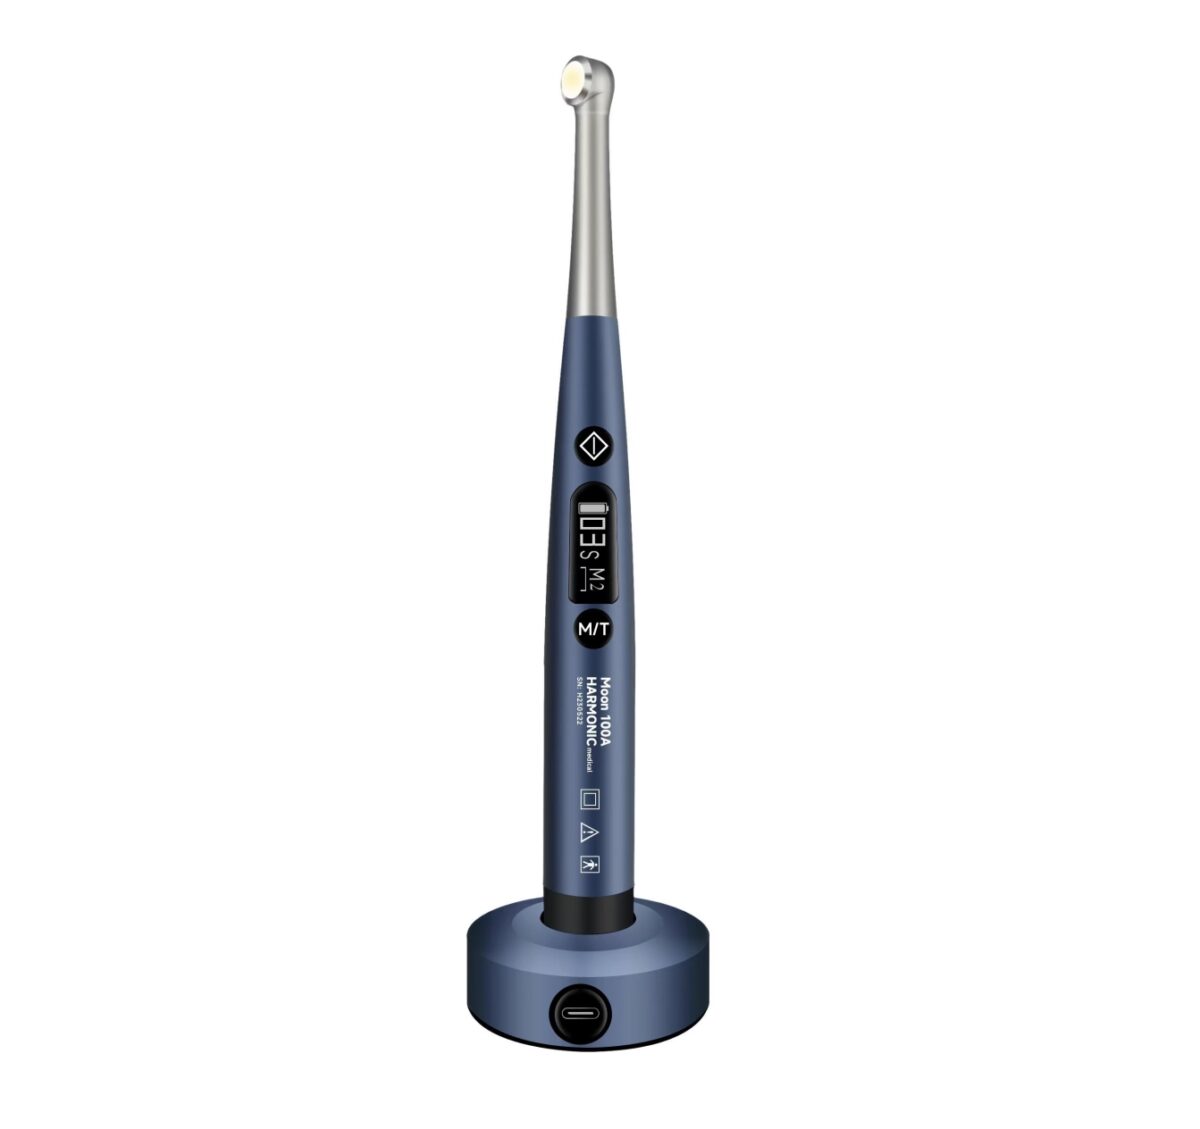 Portable led curing light